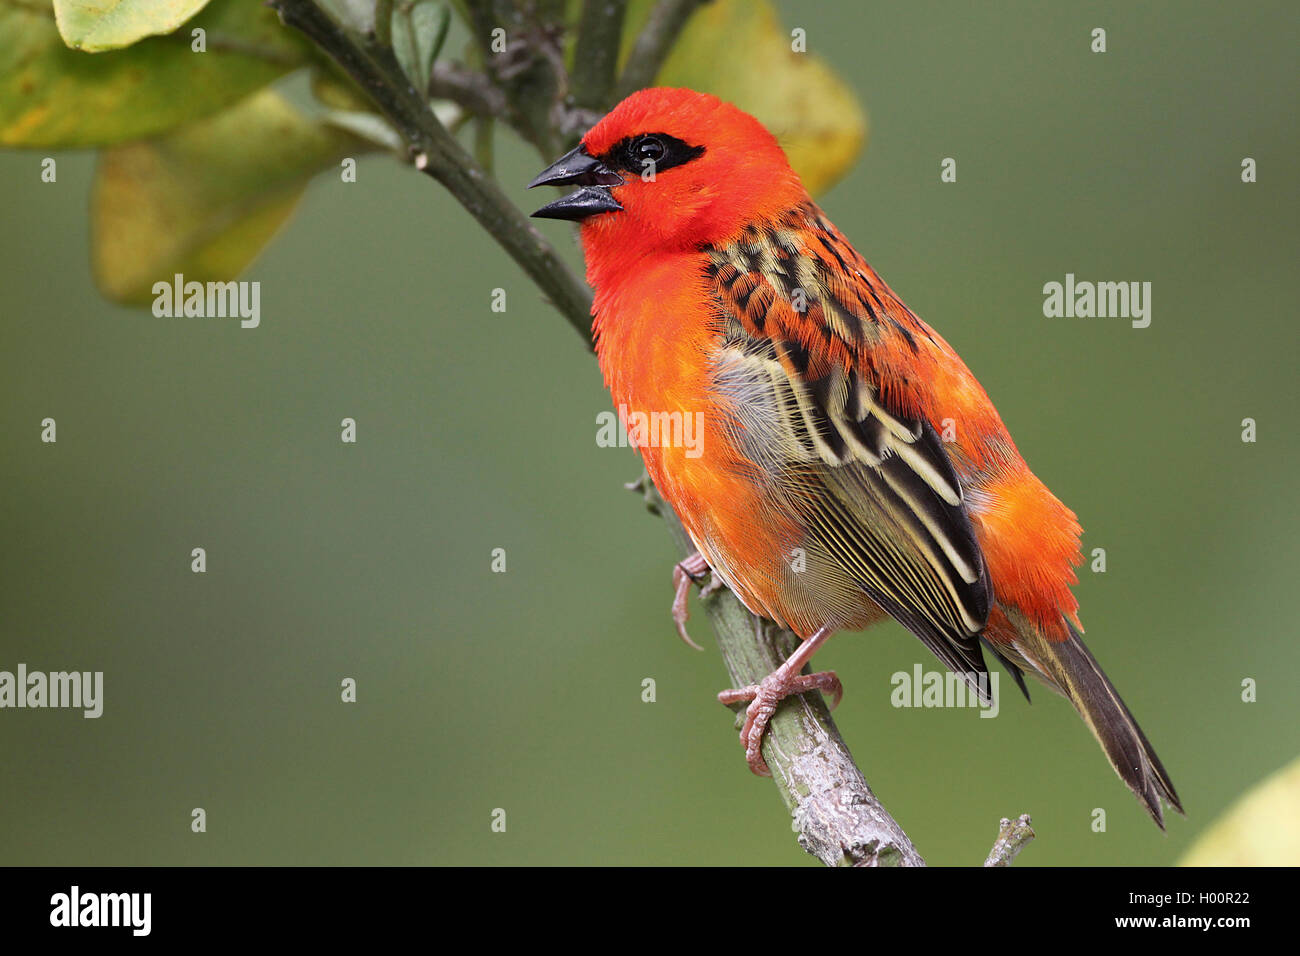 Madagascan red fody (Foudia madagascariensis), male in breeding plumage sitting on a twig, side view, Seychelles Stock Photo